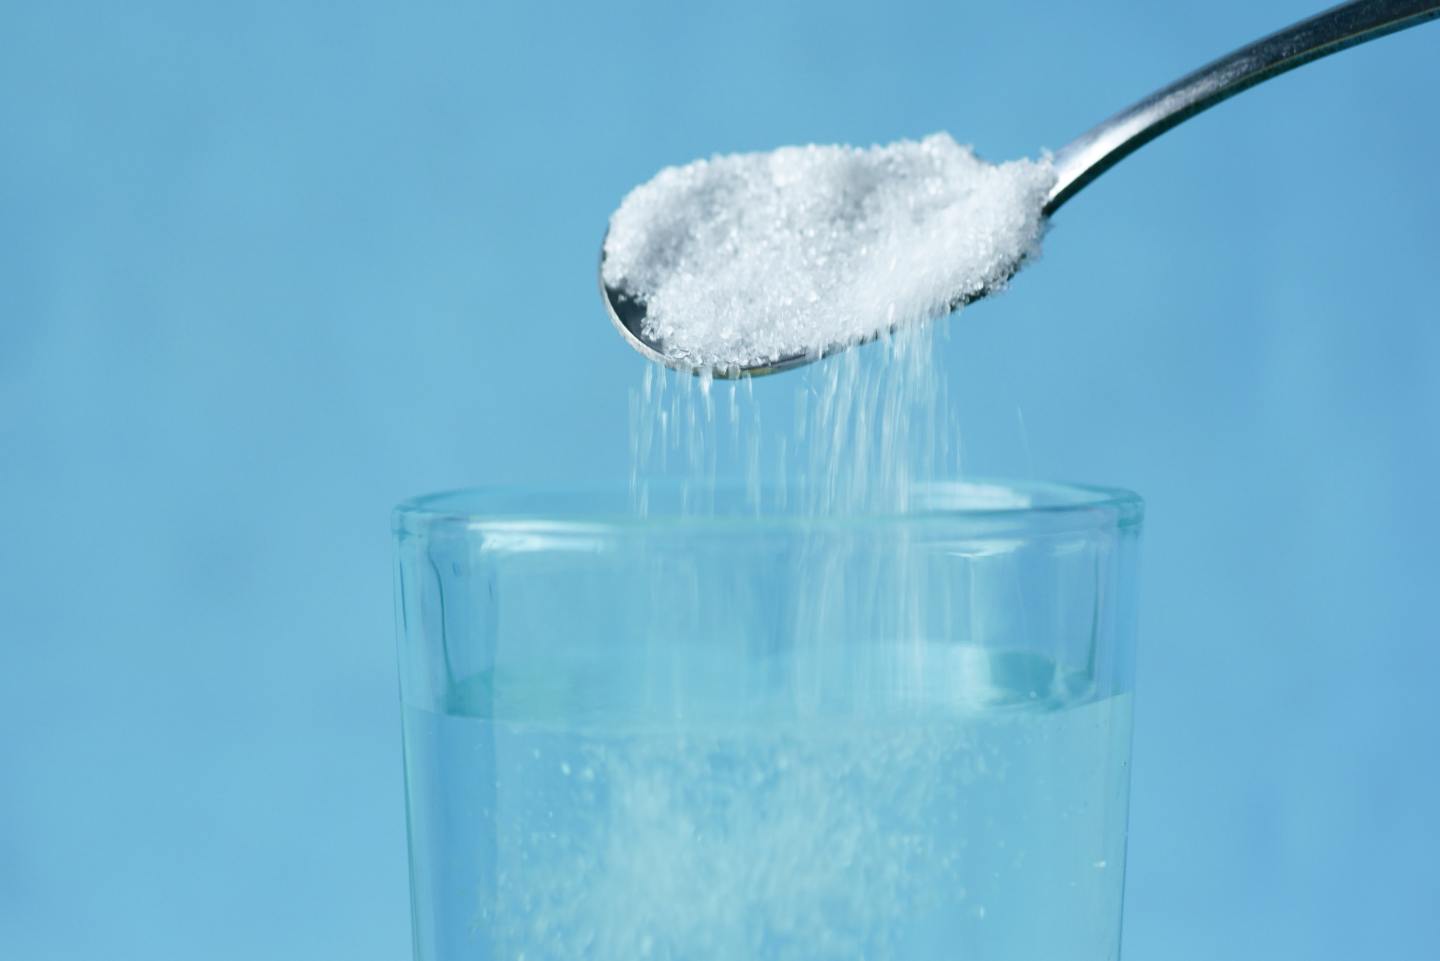 salt on spoon being poured into glass of water